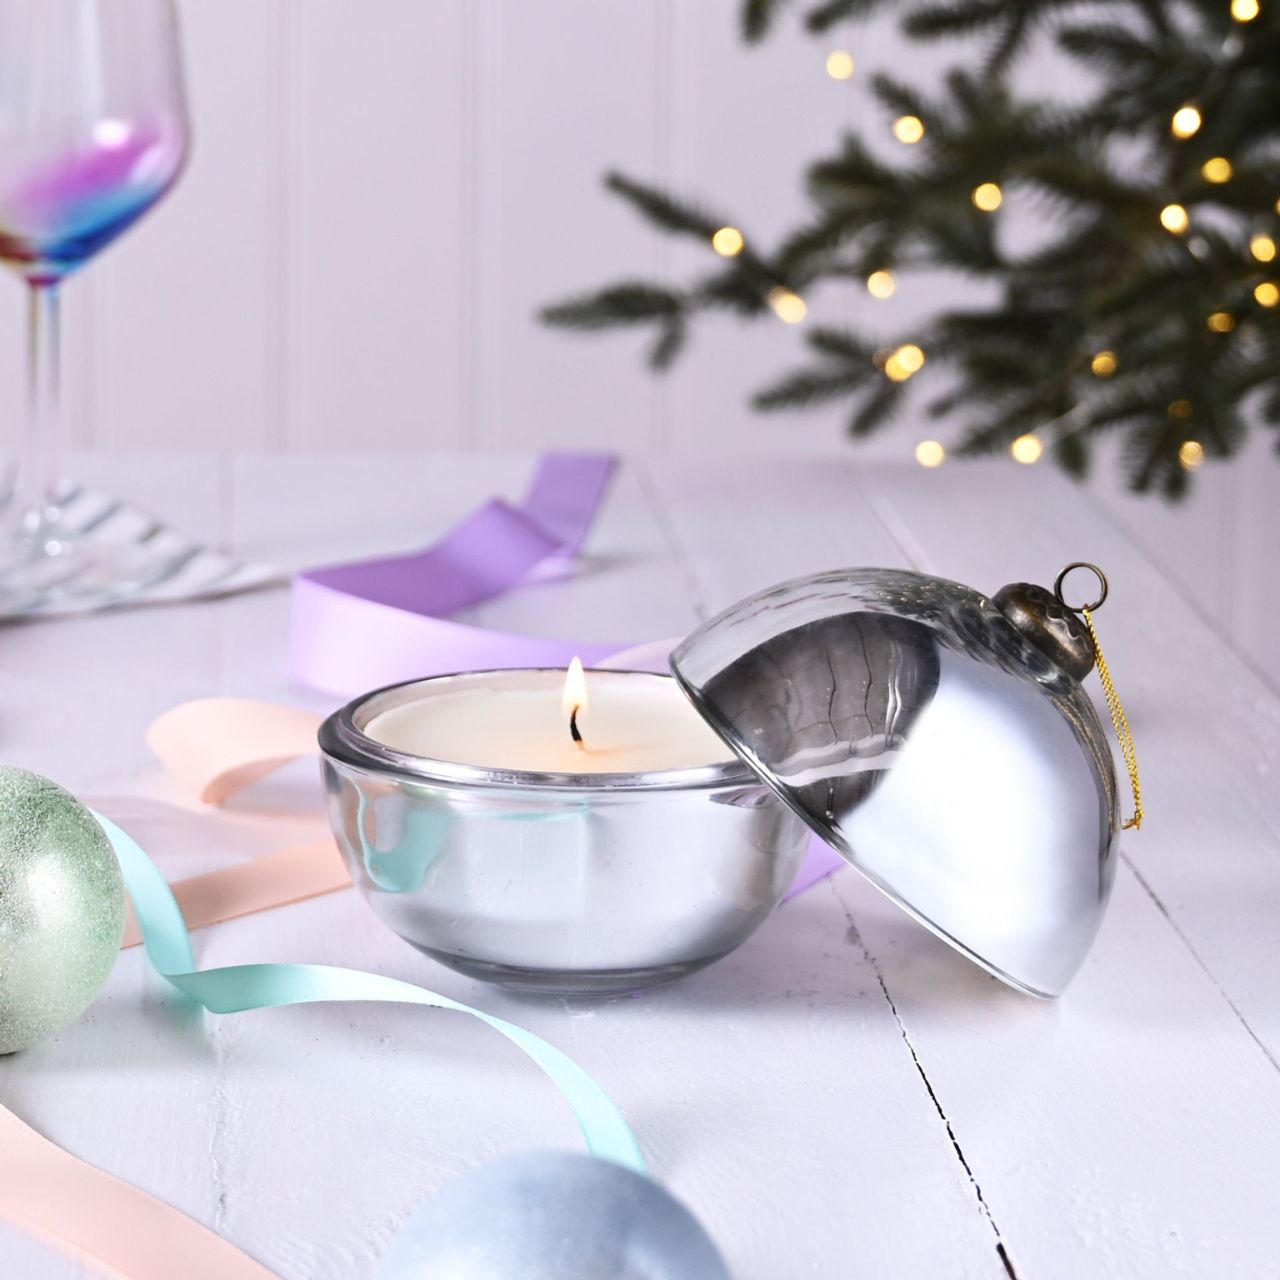 Silent Night Fragranced Glass Bauble Candle Christmas Silver  A Silent Night fragranced glass bauble candle.  This aromatic candle makes an eye-catching addition to homes during the festive season.